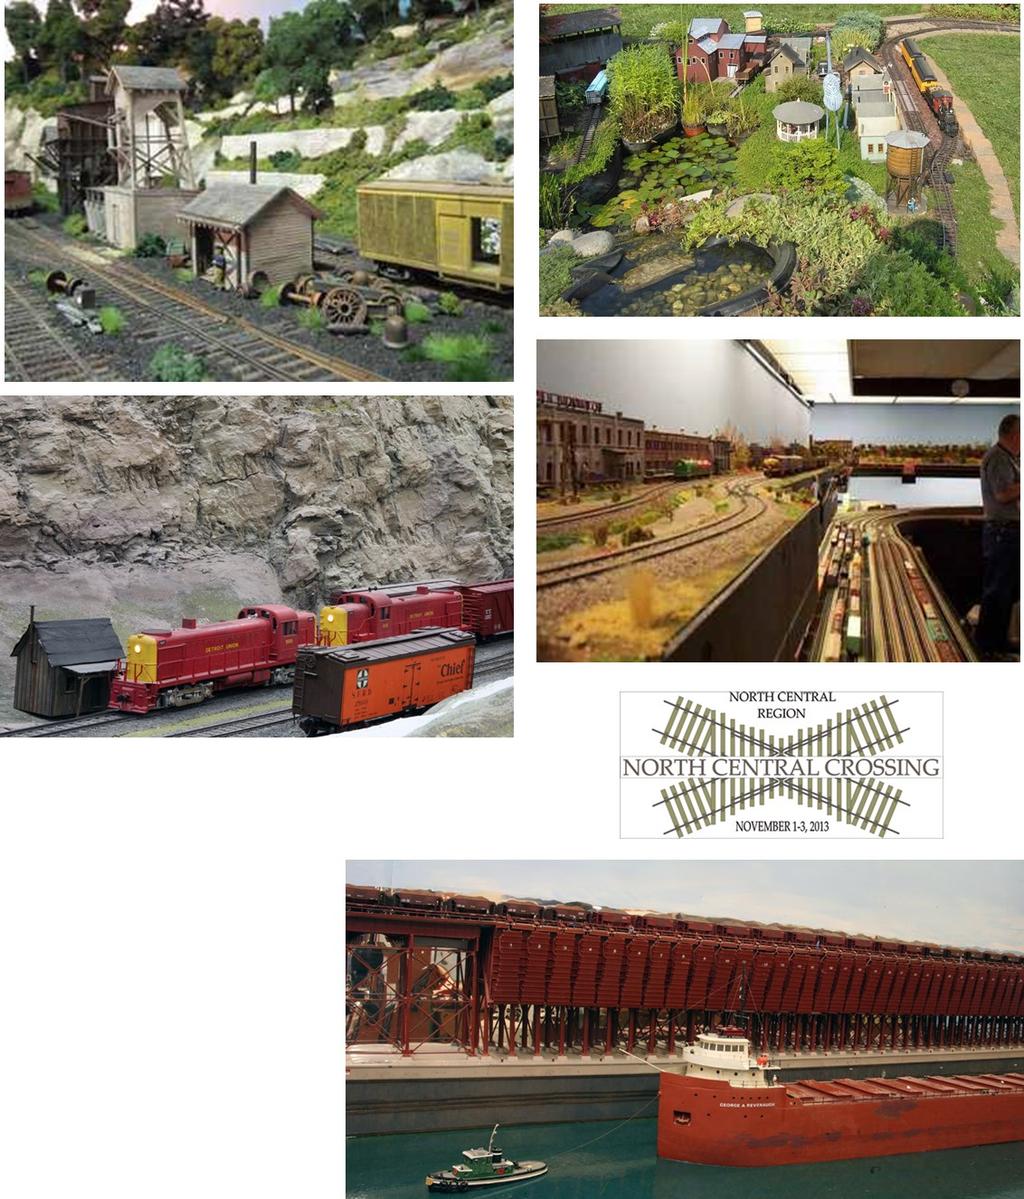 RAILFANNING DIVISION 8 LAYOUTS NCR GOES TRACKSIDE from top left then clockwise- Central Indiana RR Down by the Rock Quarry Ed Black HO Scale Loon Lake Railroad & Navigation Co Moving passengers